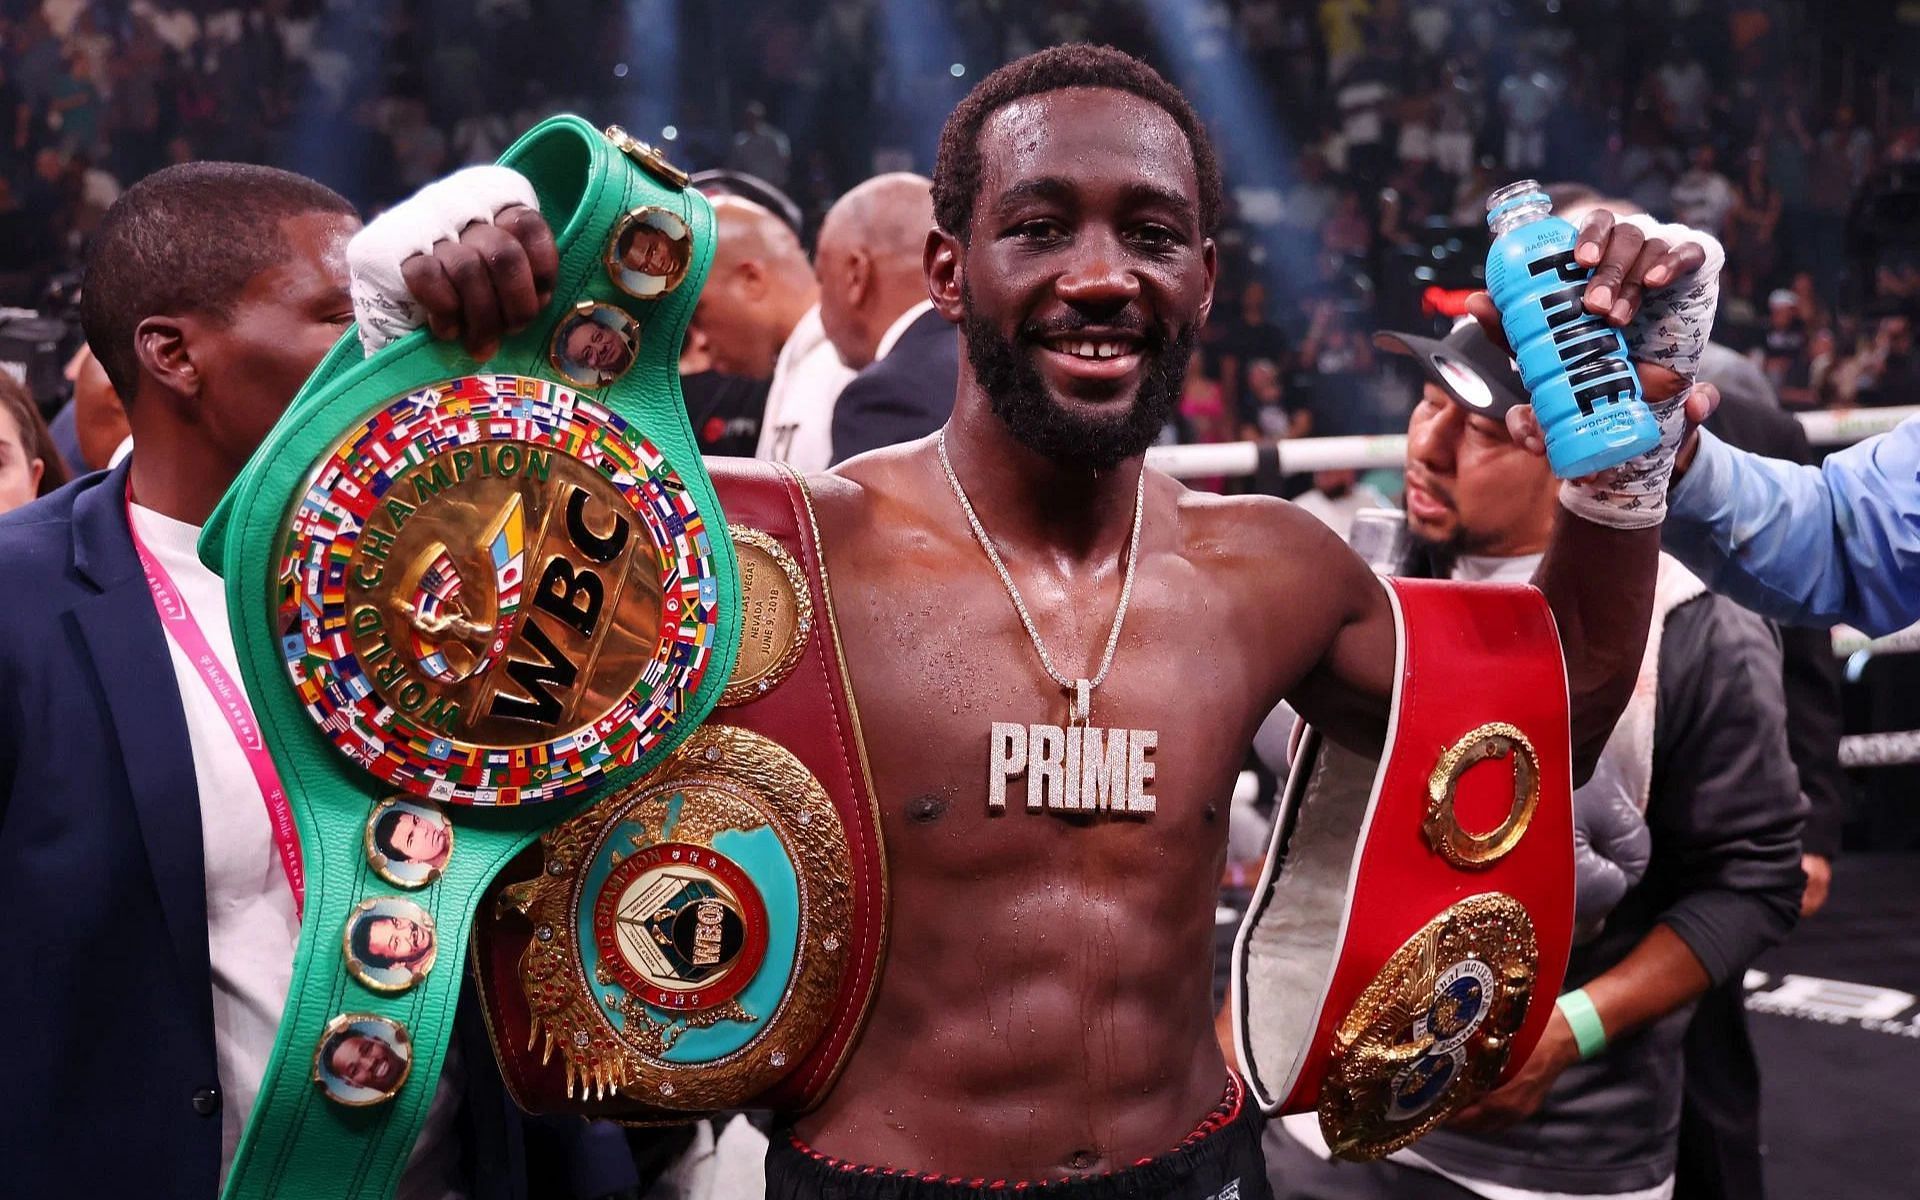 Terence Crawford (pictured) calls out fellow mega-star for a duel in the ring [Image Courtesy: @GettyImages]